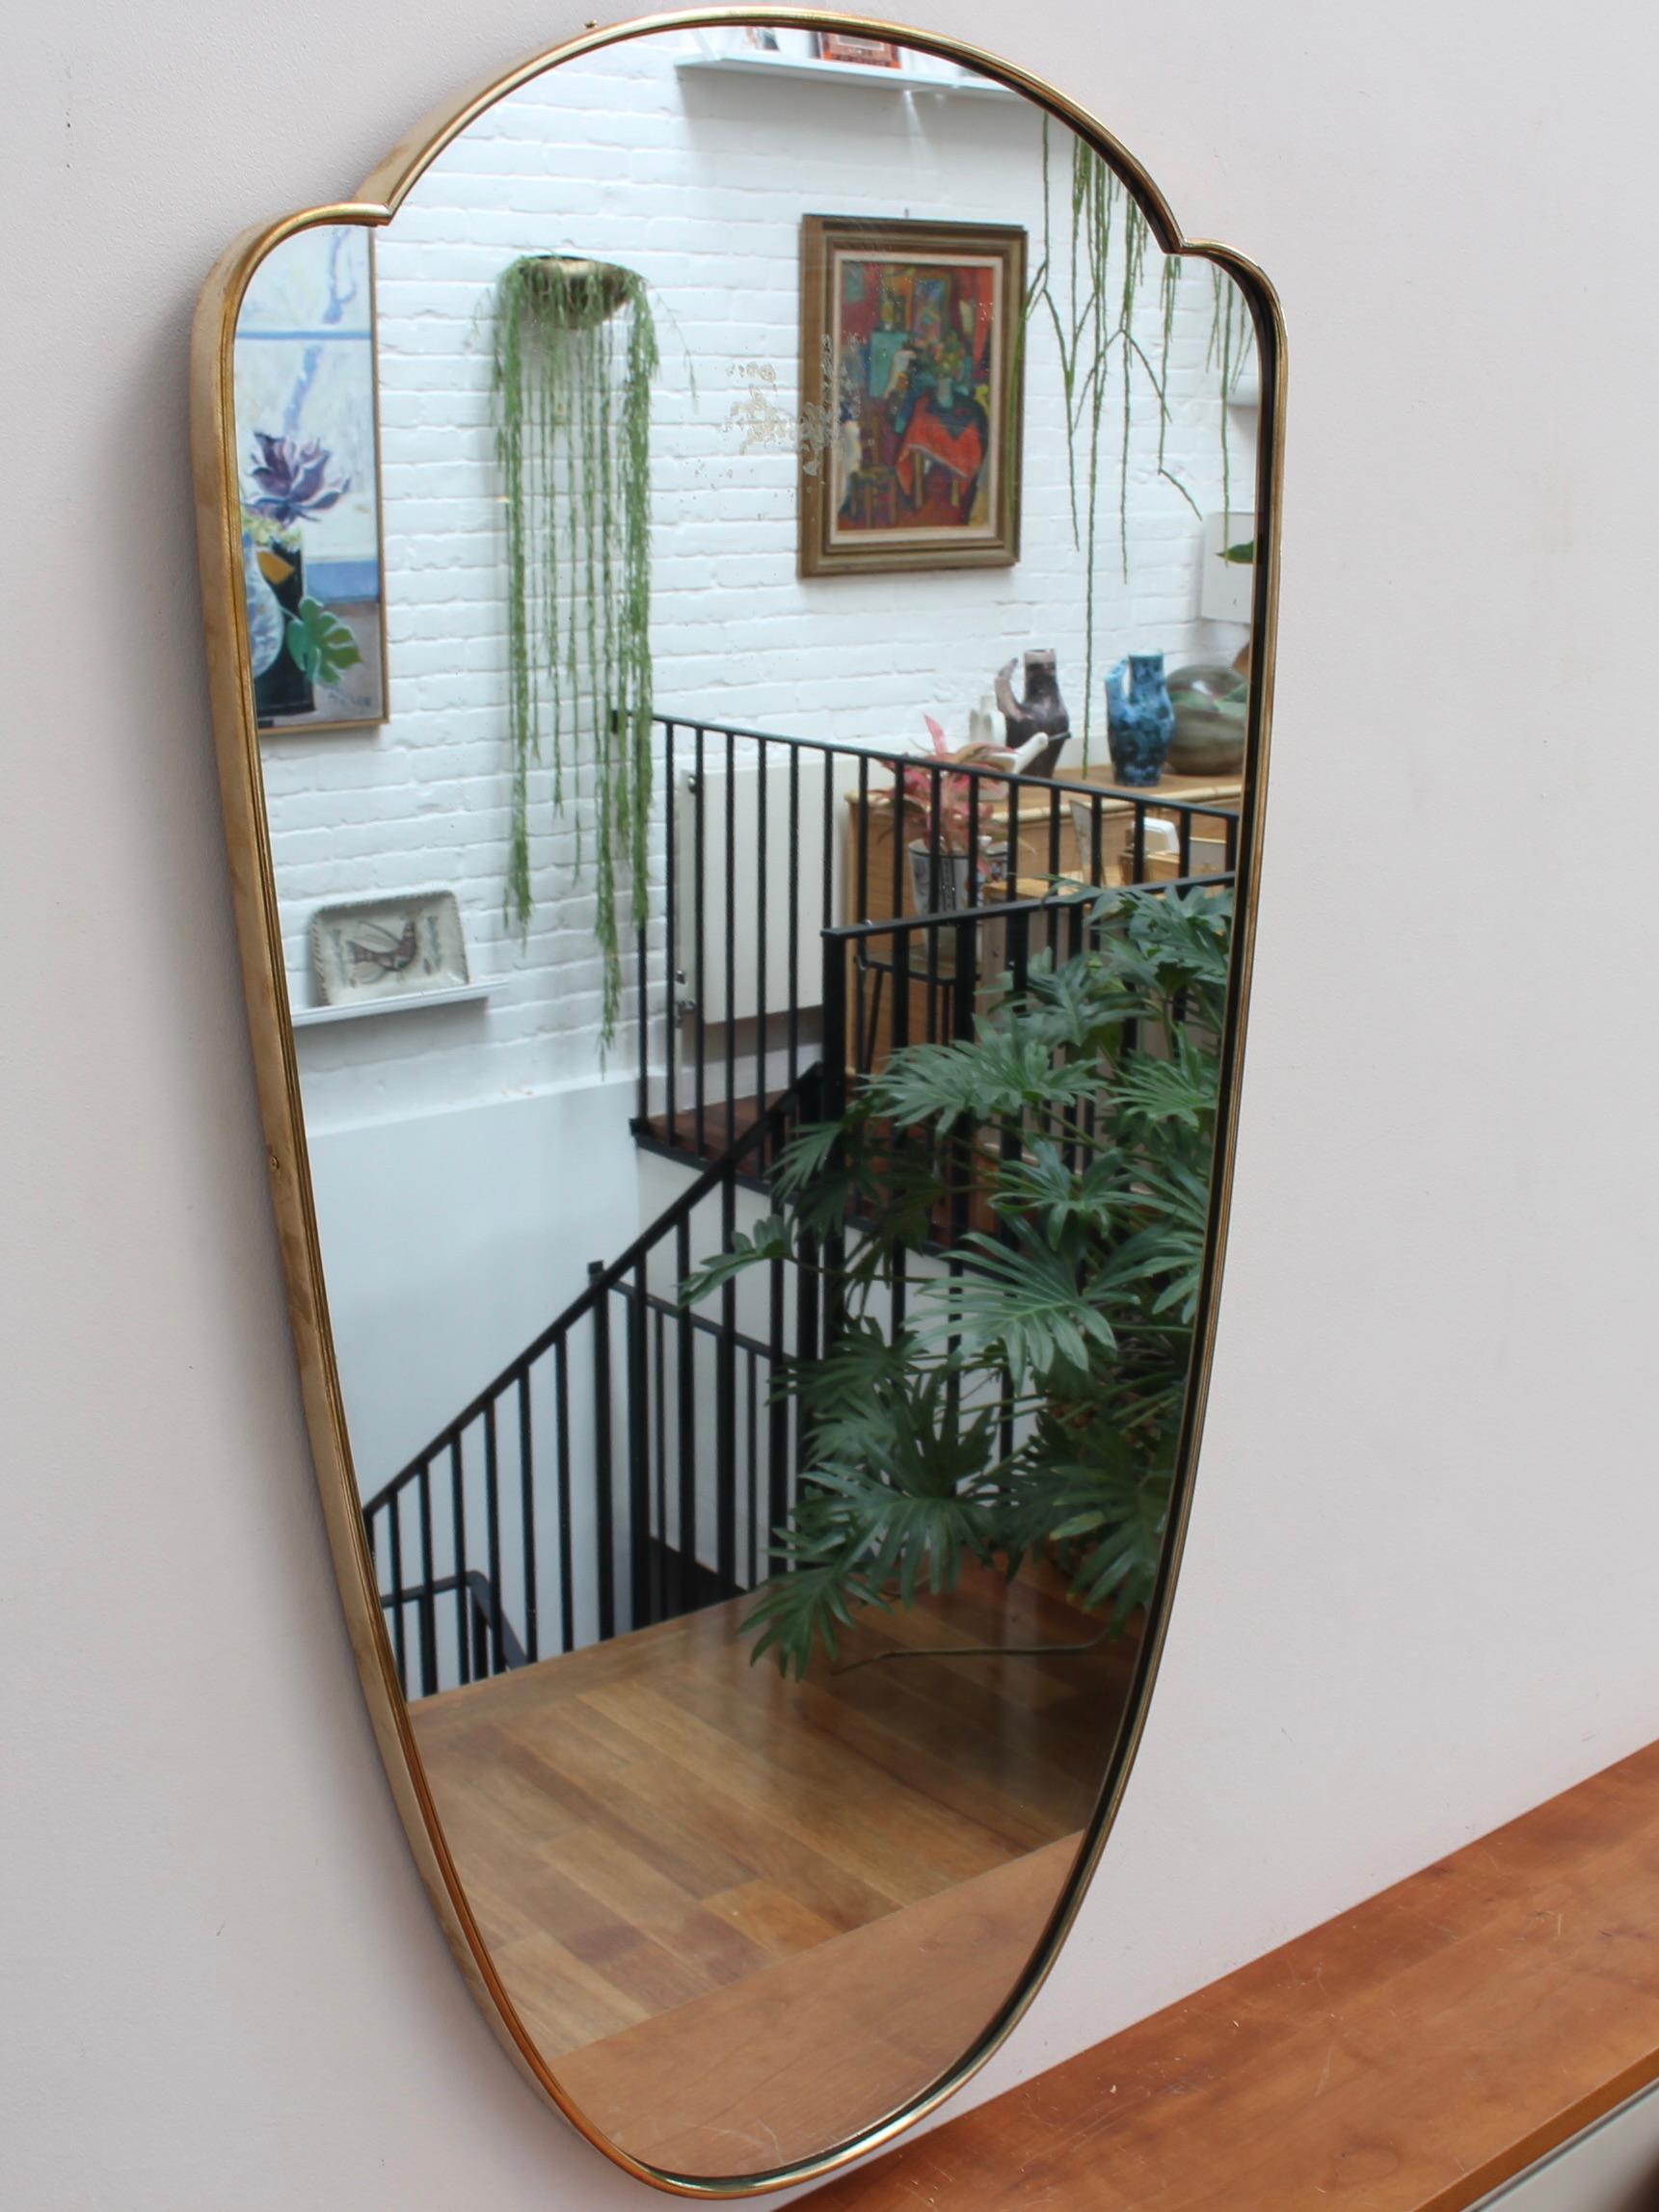 Mid-century Italian wall mirror with brass frame (circa 1950s). The mirror is classically-shaped and distinctive in a Gio Ponti style. The frame is in good overall condition with a characterful, age-related patina. The mirror is in fair condition